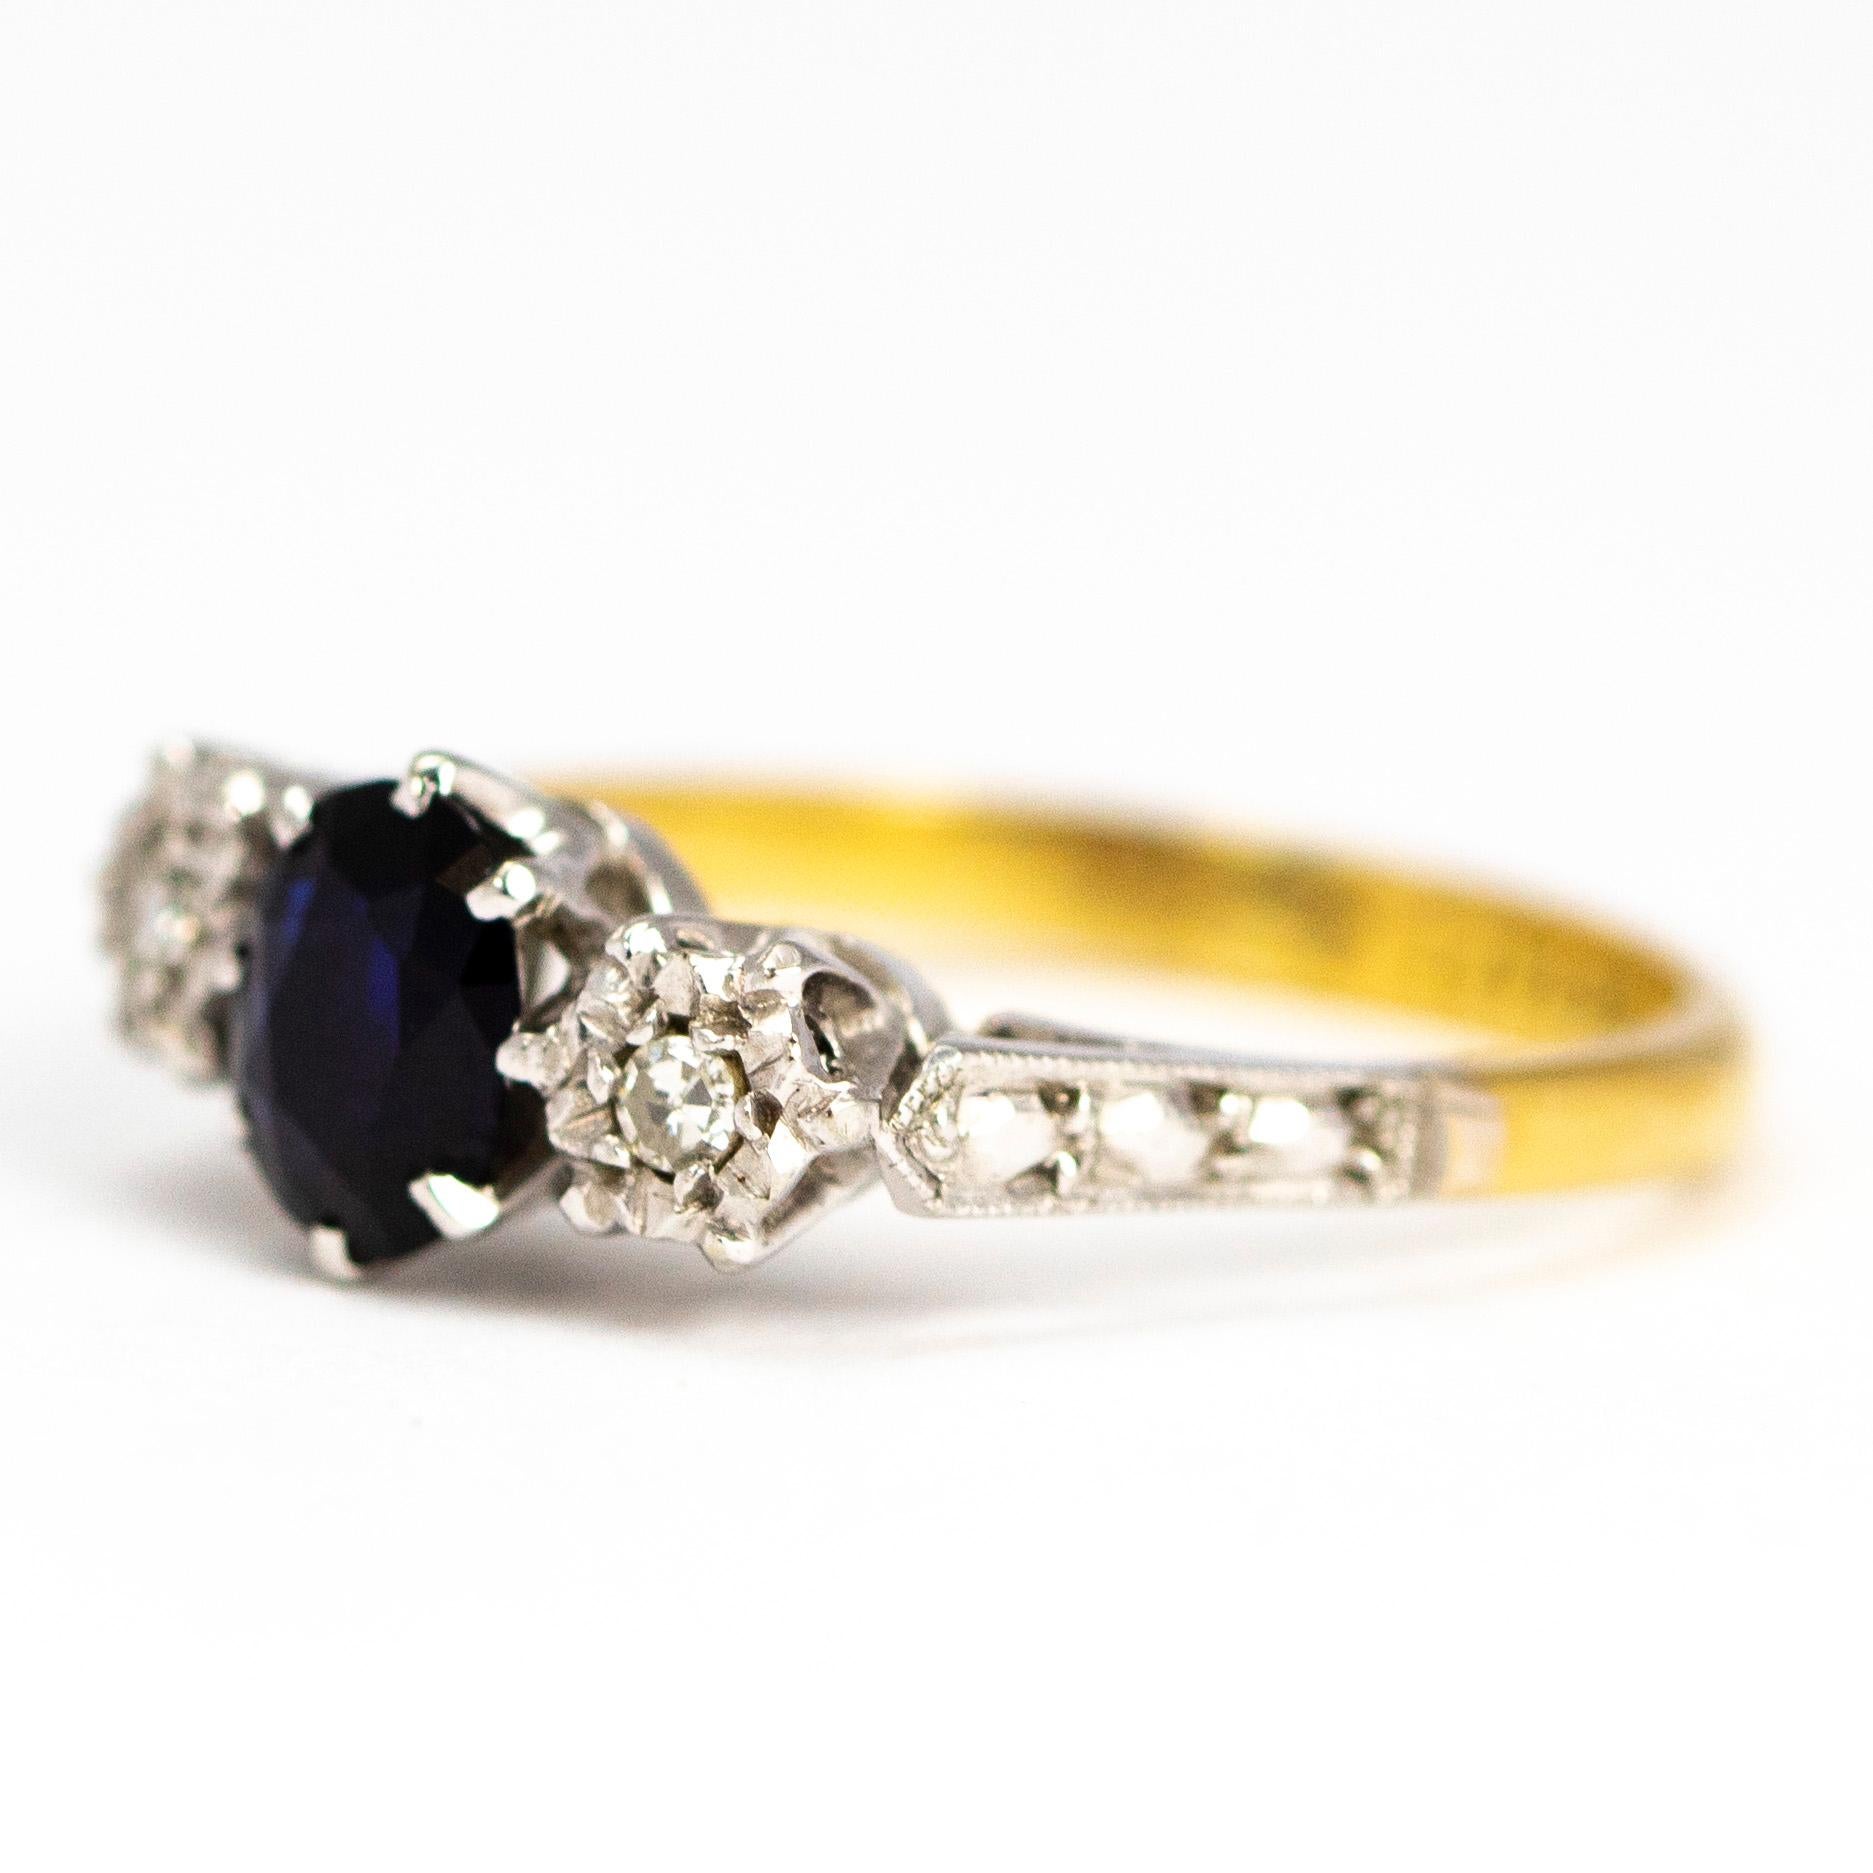 The three stones in this ring are set in platinum and the rest of the ring is modelled in 18ct gold. The central sapphire measures 60pts and the diamonds measure 5pts. 

Ring Size: J 1/2 or 5

Weight: 2.55g 